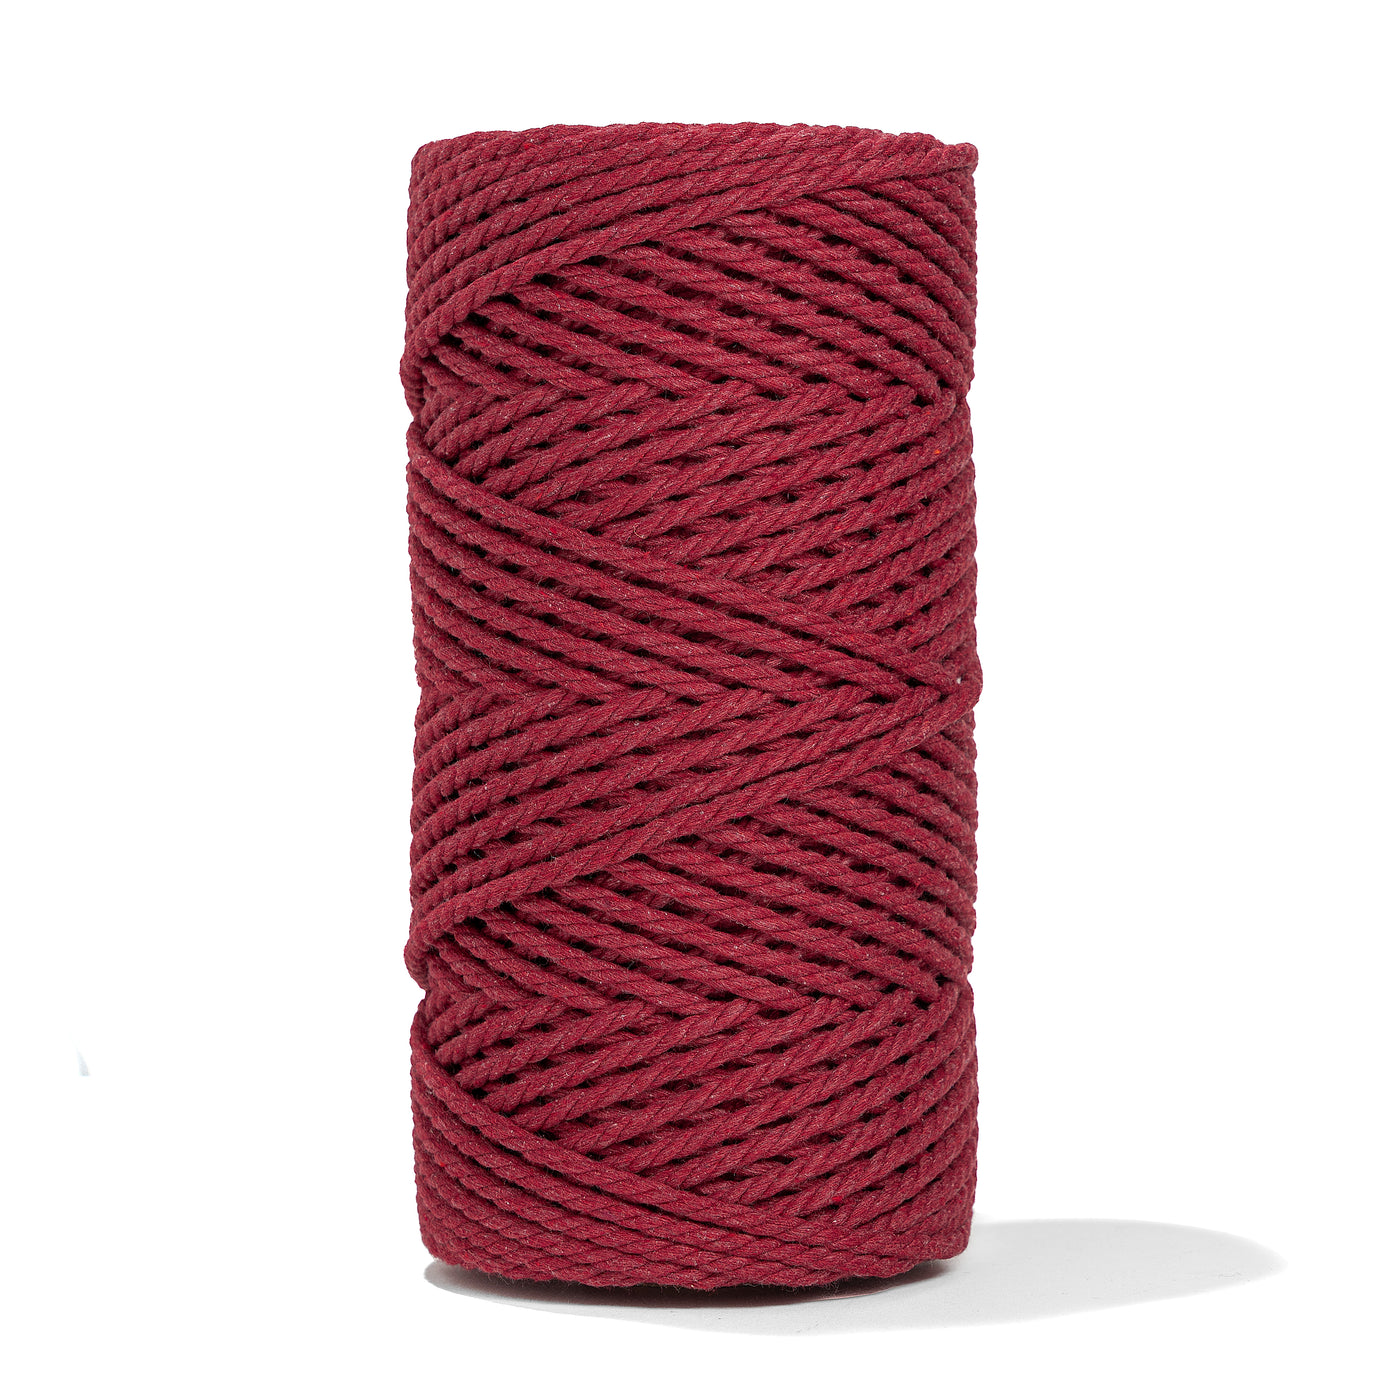 COTTON ROPE ZERO WASTE 3 MM - 3 PLY - BERRY RED COLOR